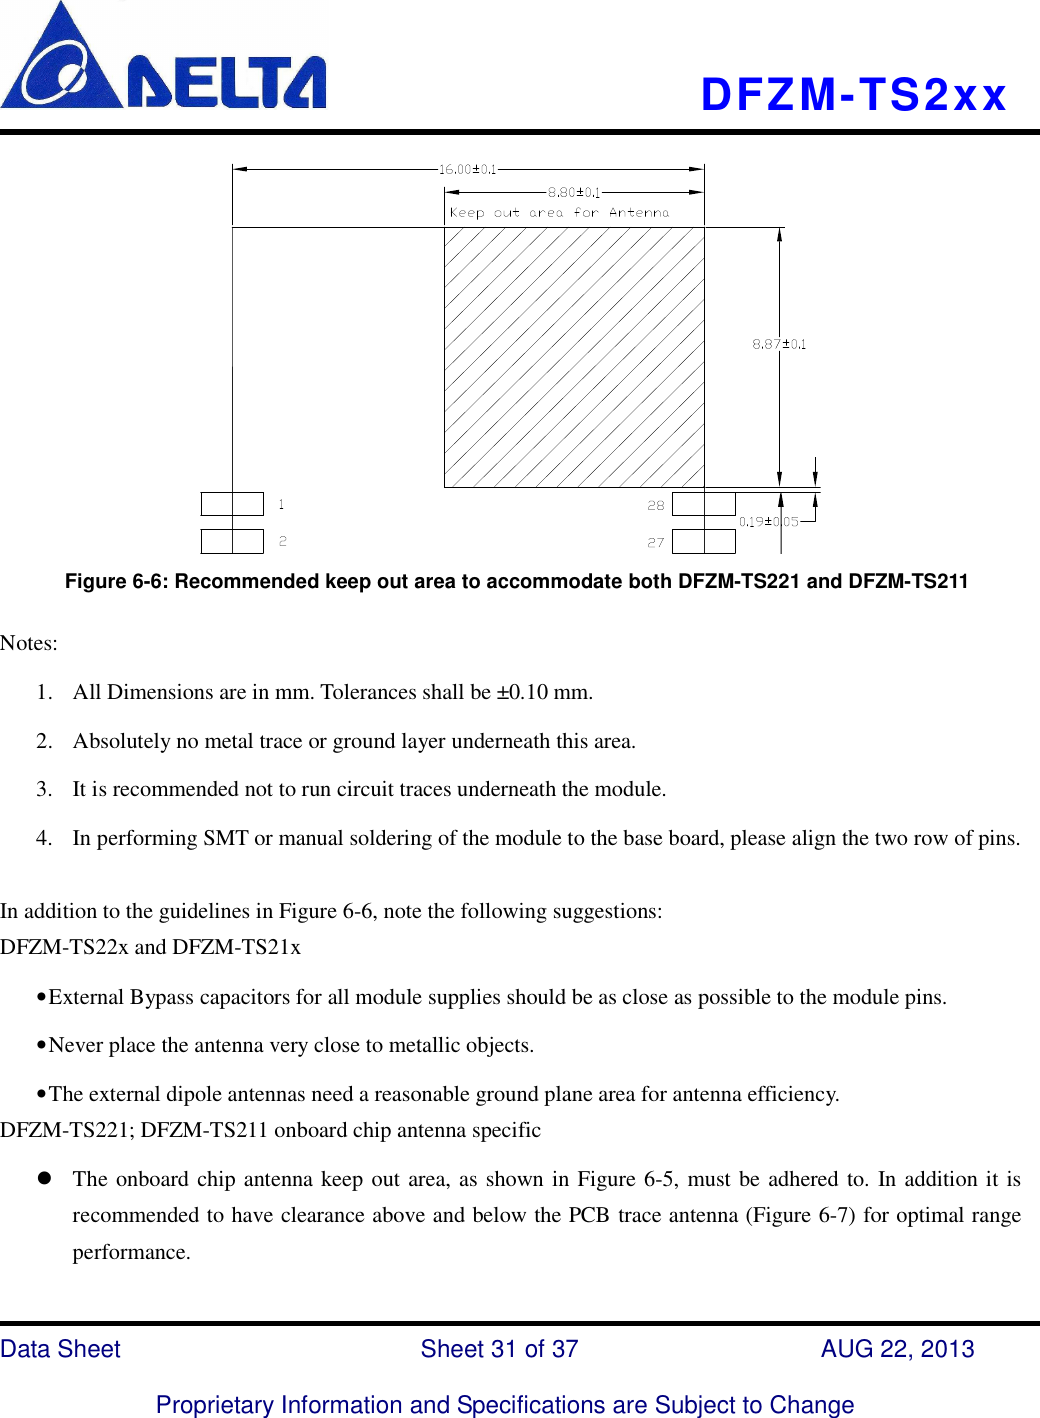    DFZM-TS2xx   Data Sheet                              Sheet 31 of 37                    AUG 22, 2013  Proprietary Information and Specifications are Subject to Change          Figure 6-6: Recommended keep out area to accommodate both DFZM-TS221 and DFZM-TS211  Notes: 1. All Dimensions are in mm. Tolerances shall be ±0.10 mm. 2. Absolutely no metal trace or ground layer underneath this area.   3. It is recommended not to run circuit traces underneath the module. 4. In performing SMT or manual soldering of the module to the base board, please align the two row of pins.  In addition to the guidelines in Figure 6-6, note the following suggestions:   DFZM-TS22x and DFZM-TS21x • External Bypass capacitors for all module supplies should be as close as possible to the module pins. • Never place the antenna very close to metallic objects. • The external dipole antennas need a reasonable ground plane area for antenna efficiency. DFZM-TS221; DFZM-TS211 onboard chip antenna specific  The onboard chip antenna keep out area, as shown in Figure 6-5, must be adhered to. In addition it is recommended to have clearance above and below the PCB trace antenna (Figure 6-7) for optimal range performance. 